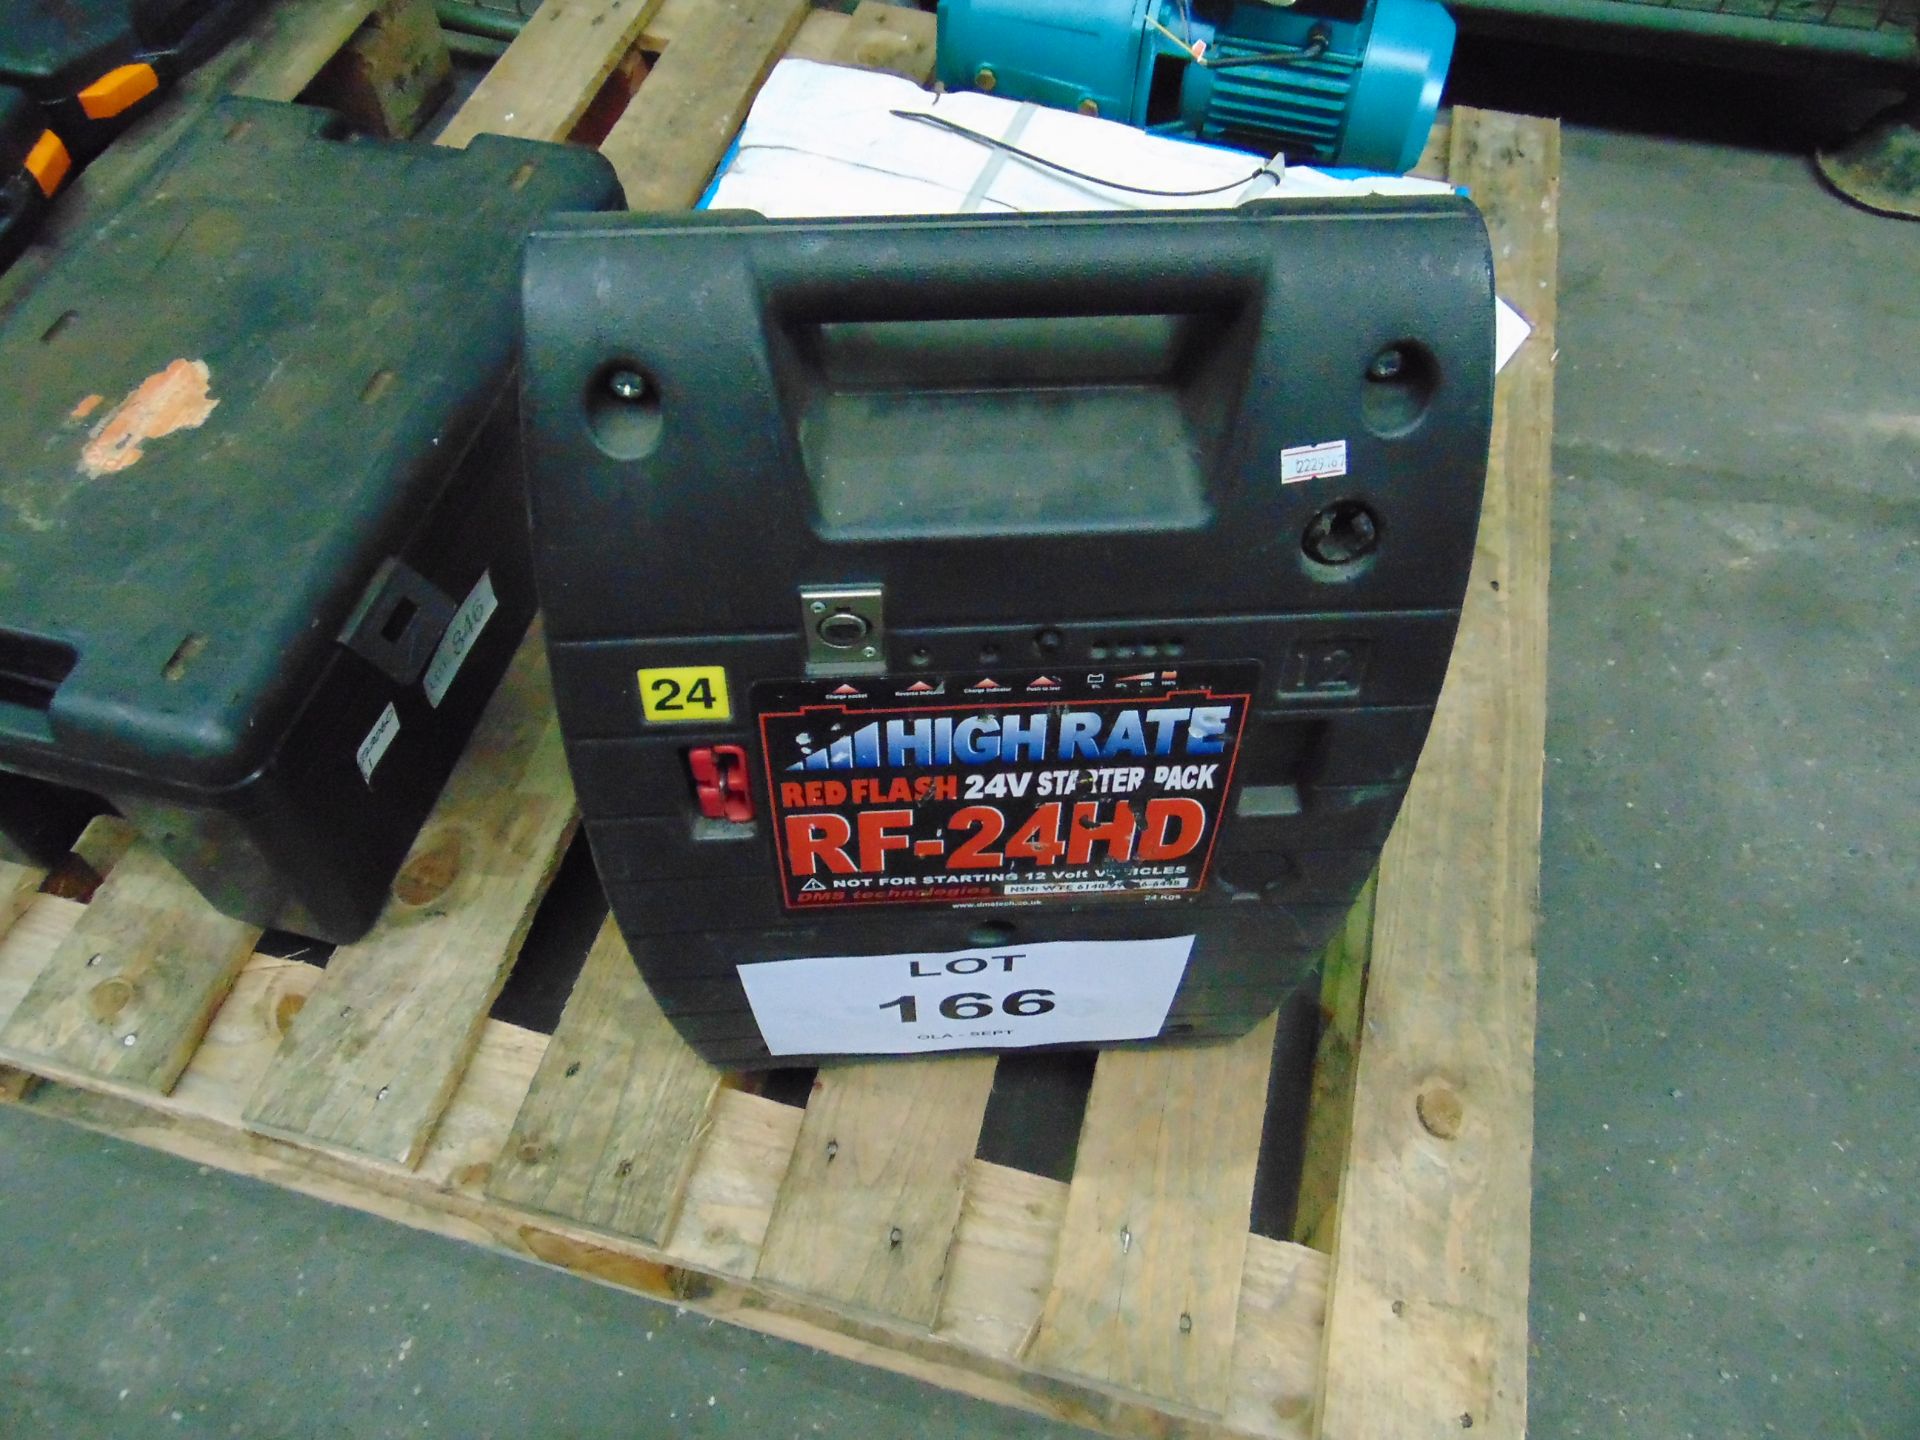 High Rate Red Flash 24 Volt RF - 24 HD Starter Pack - Image 3 of 3